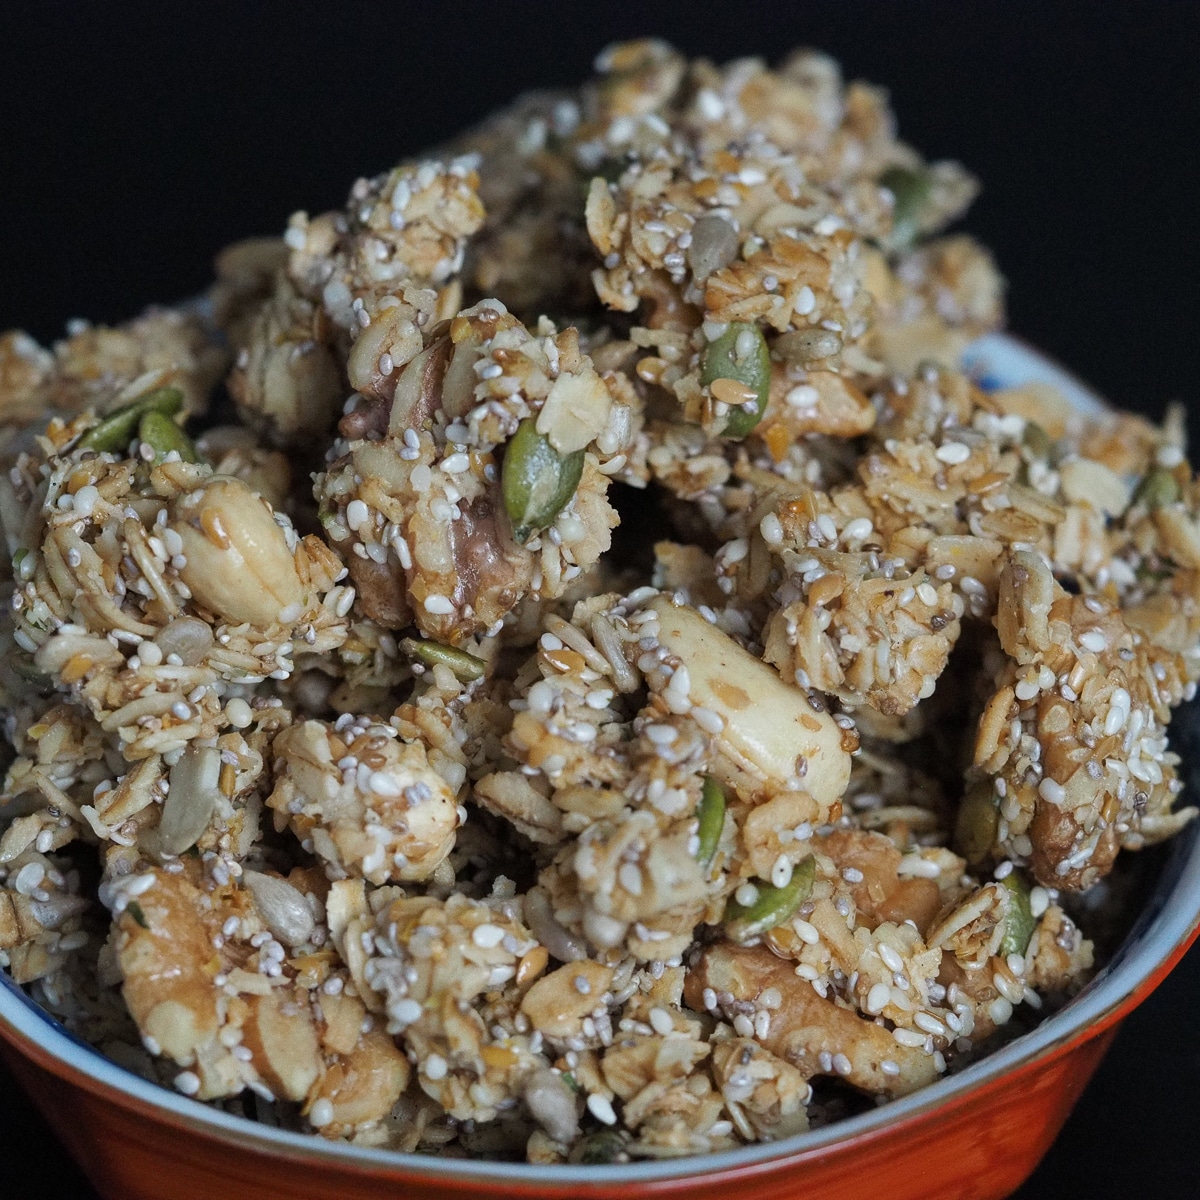 Clusters of healthy granola in a blue and red bowl